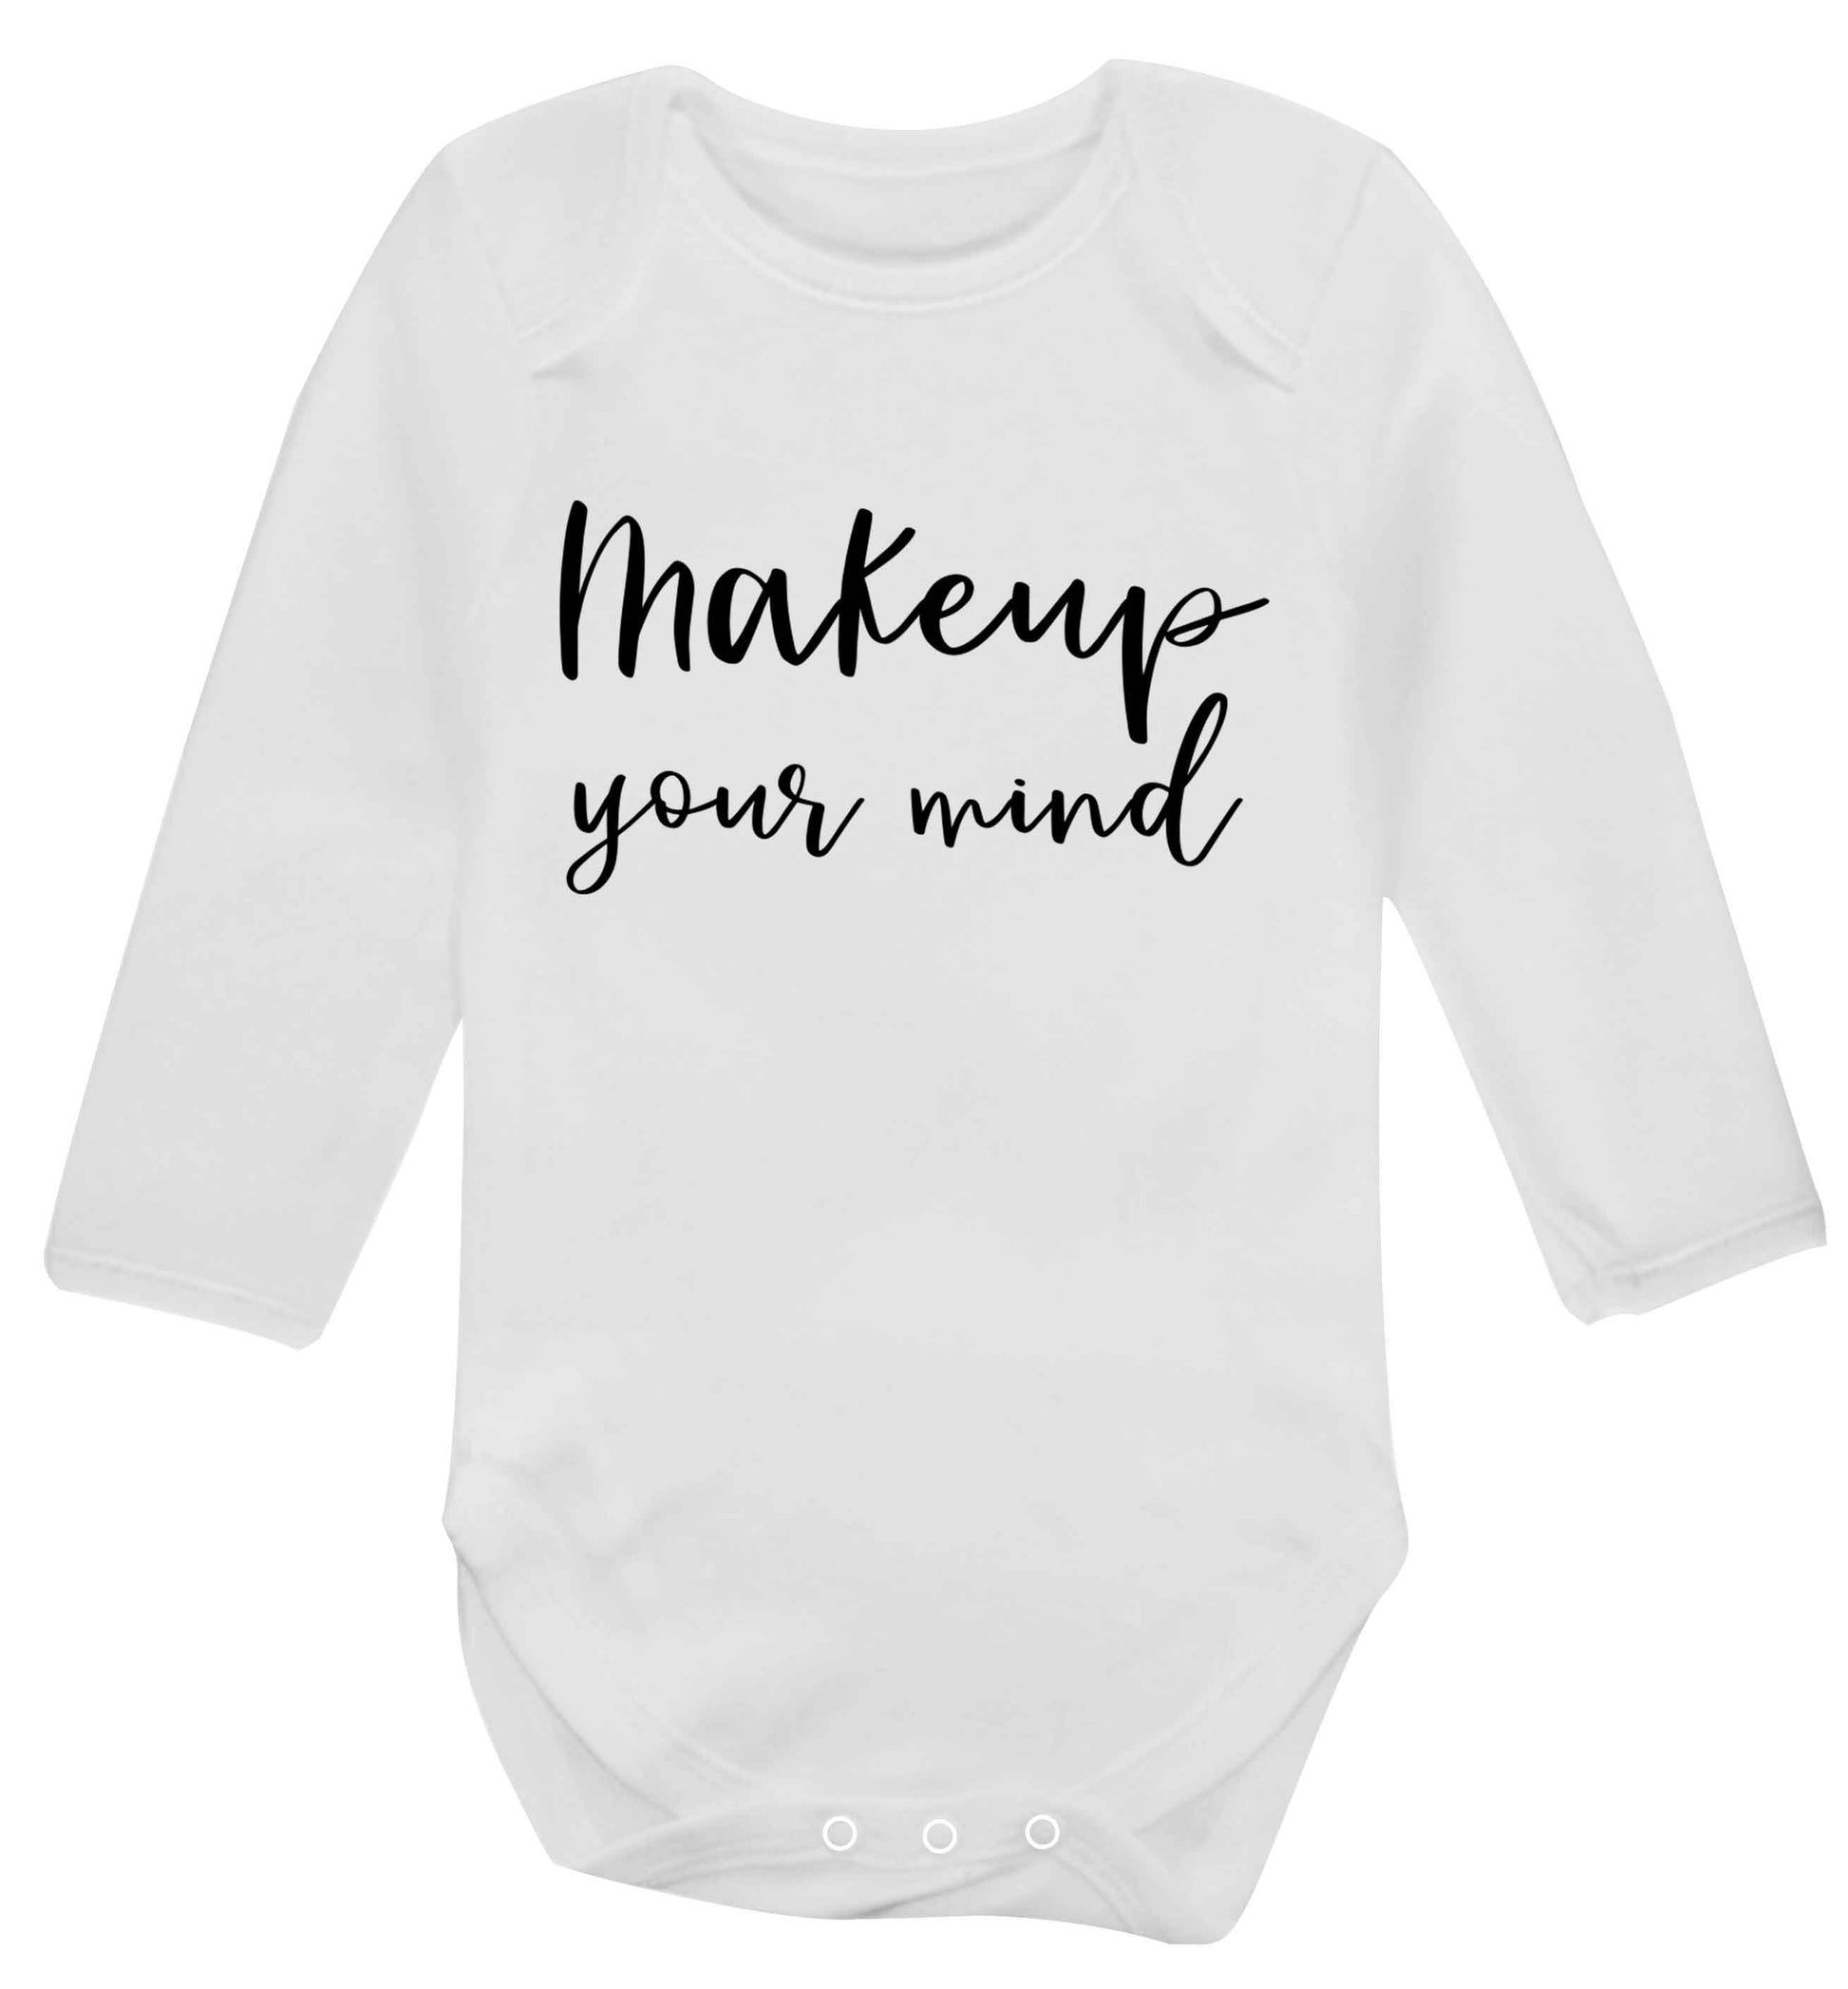 Makeup your mind Baby Vest long sleeved white 6-12 months